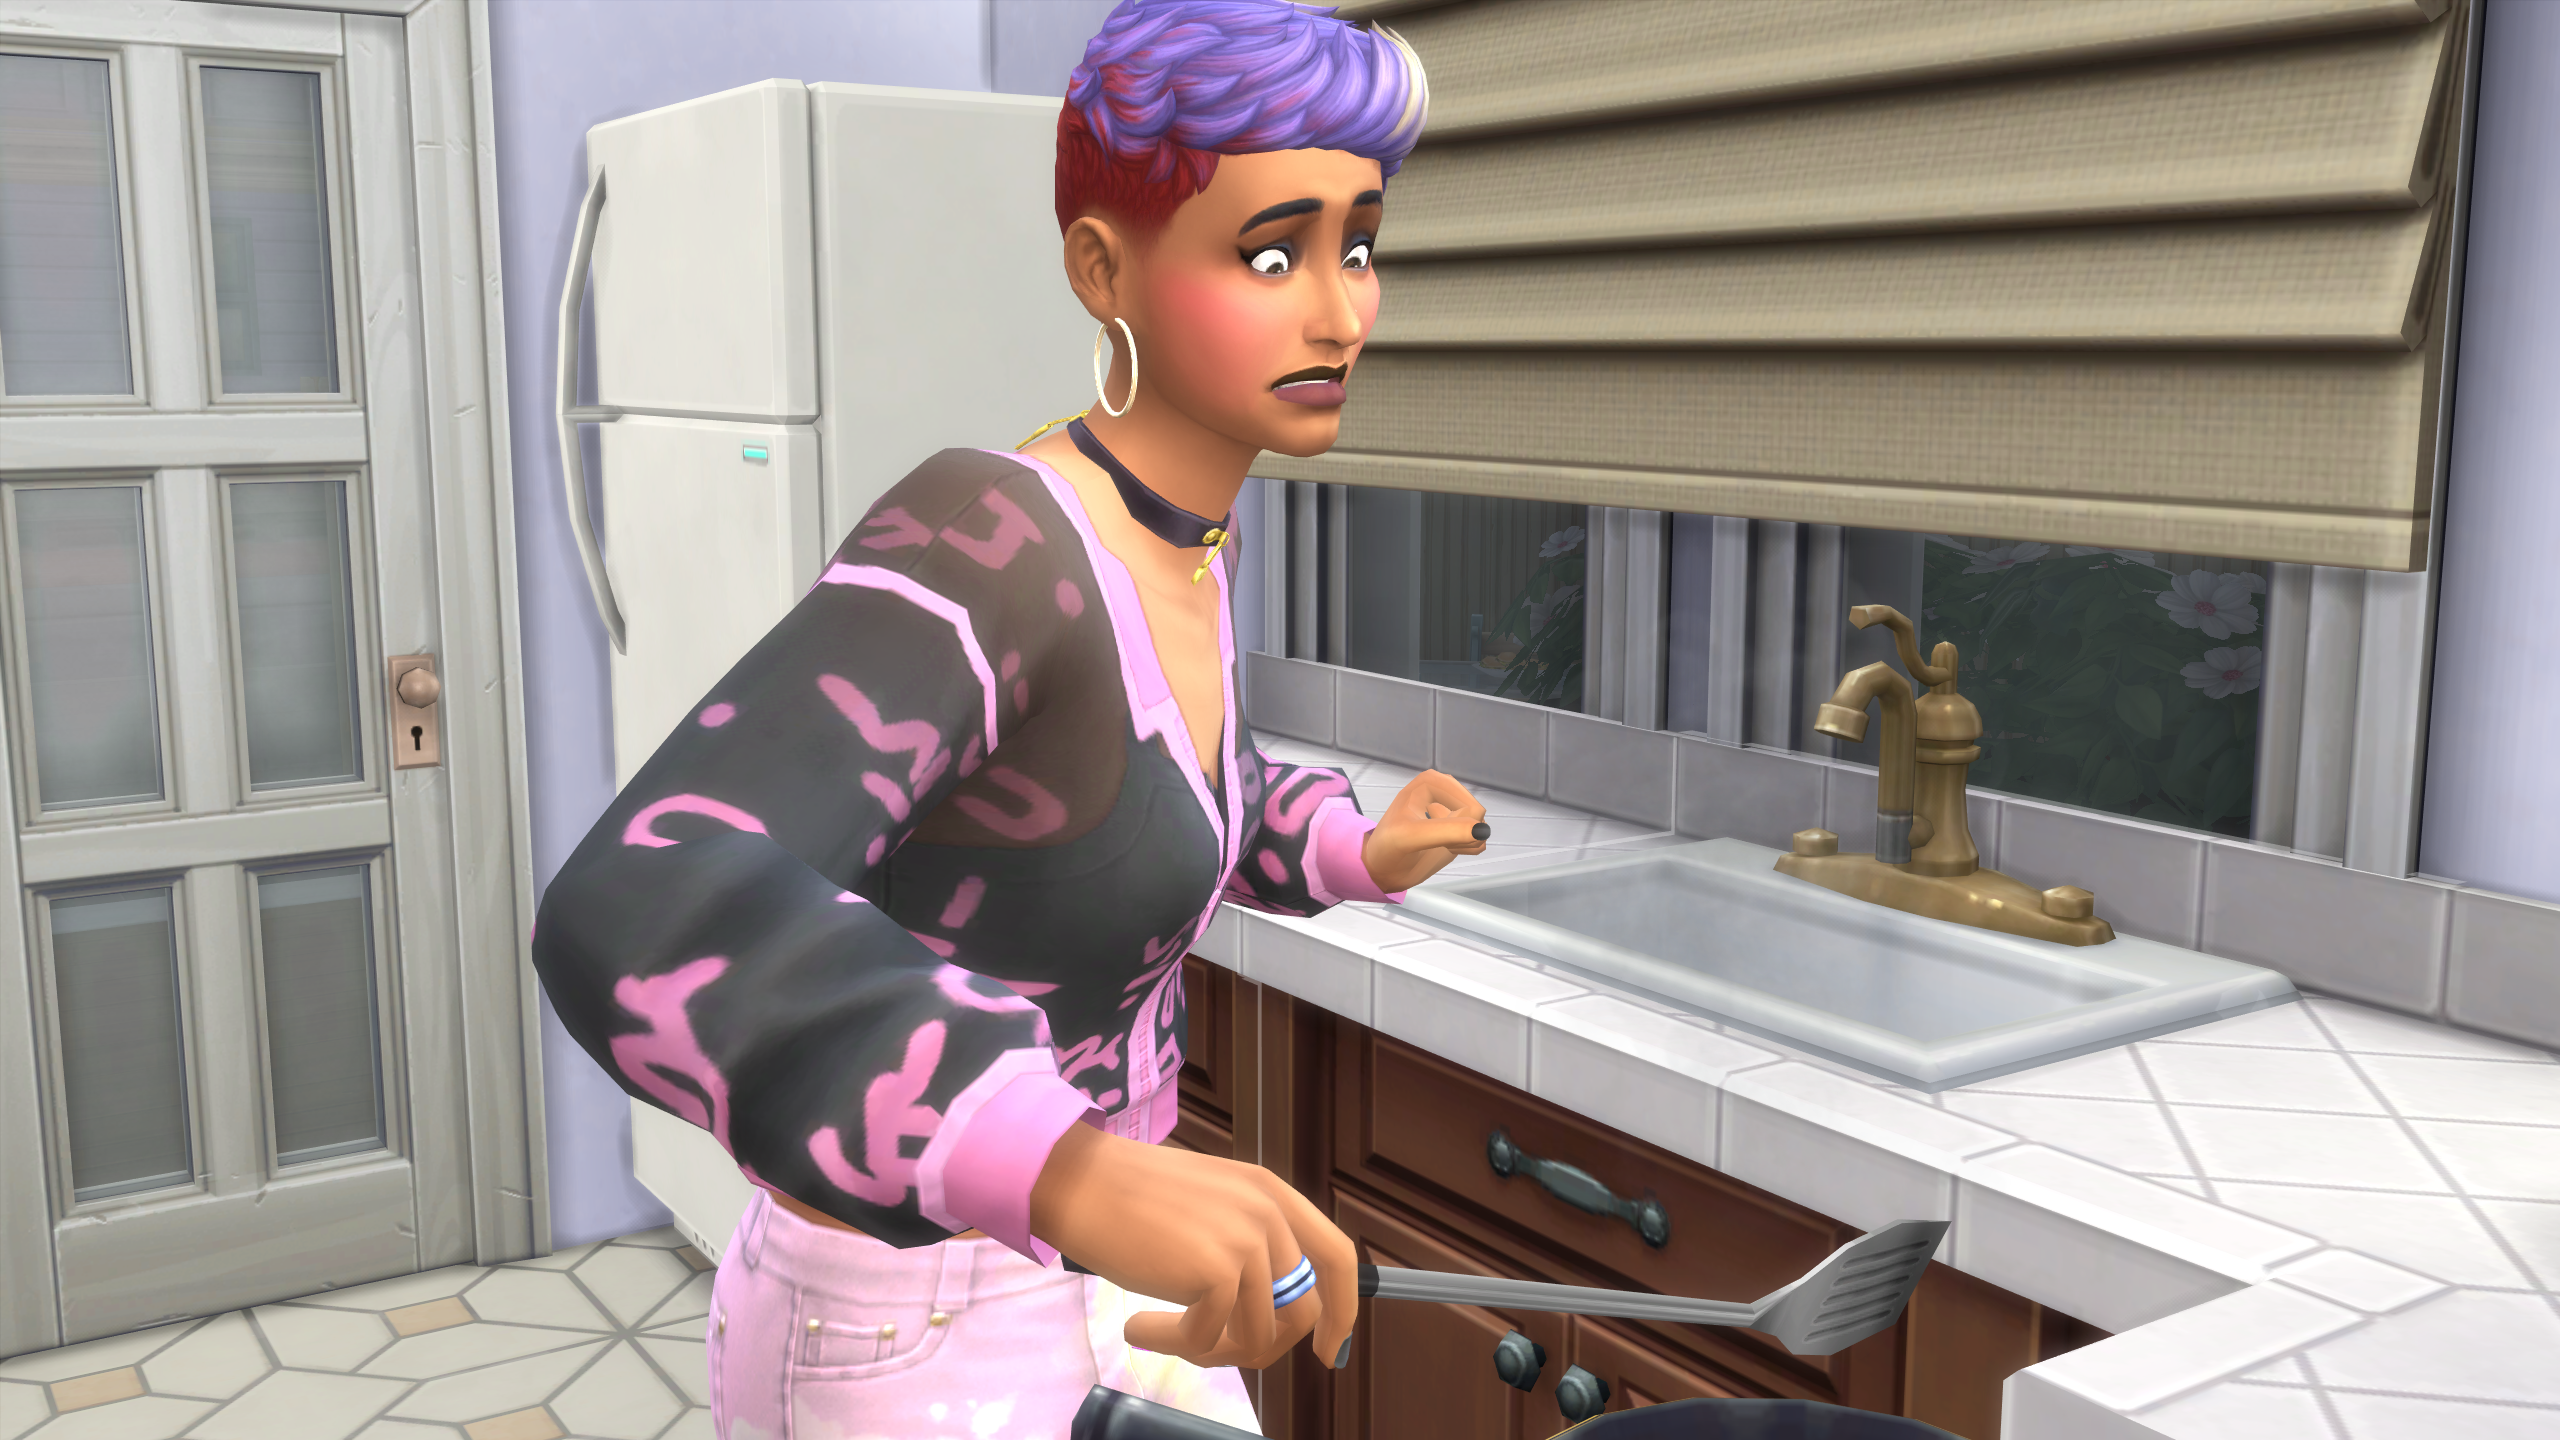 The 6 best Sims 4 challenges, from marathoning parenthood to serial killer spouses